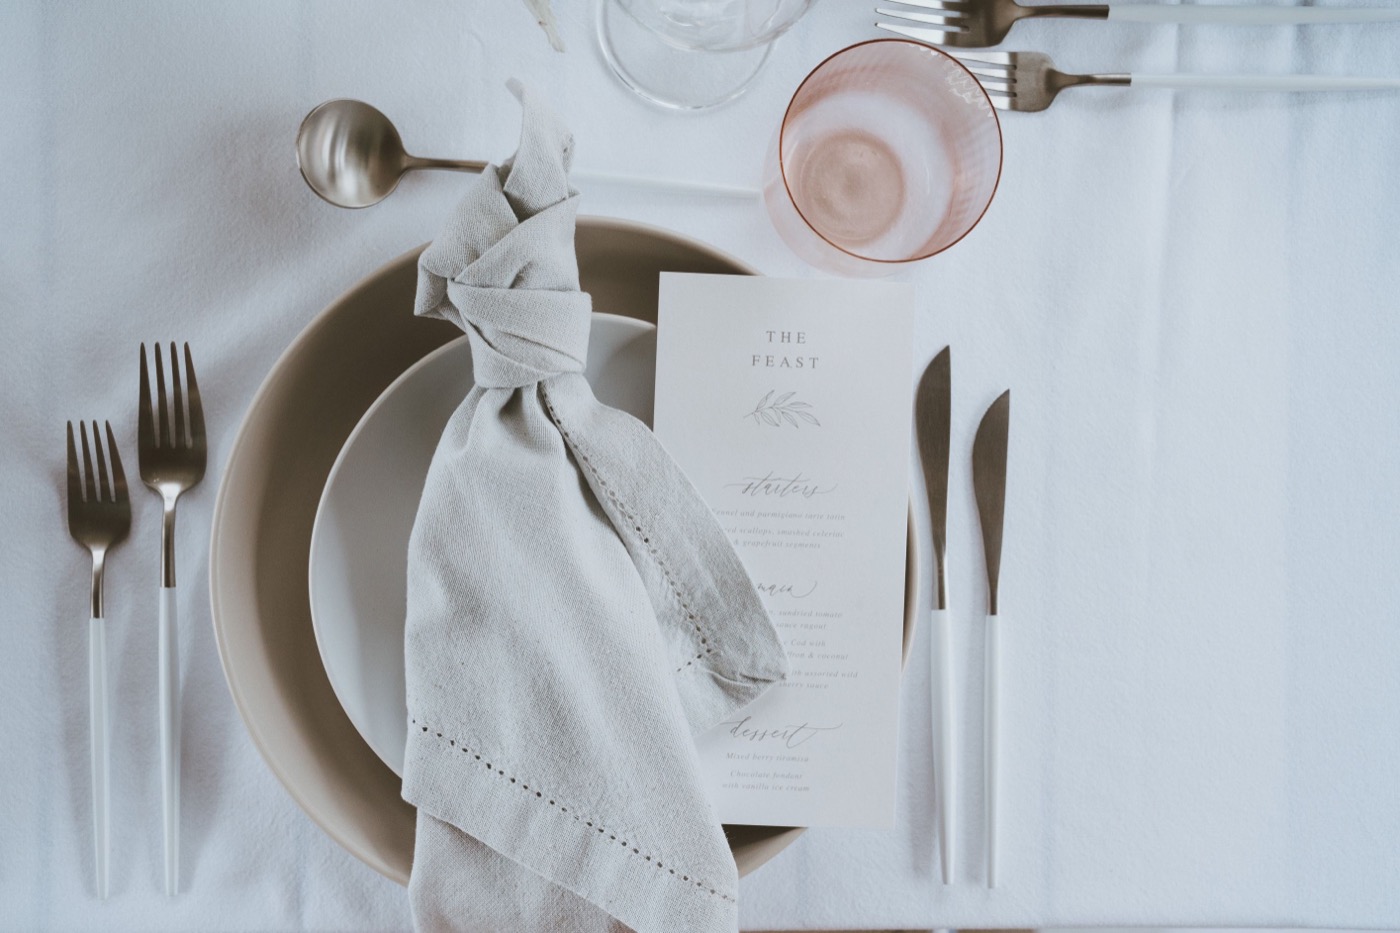 Splash Events Elopement and intimate dinner party